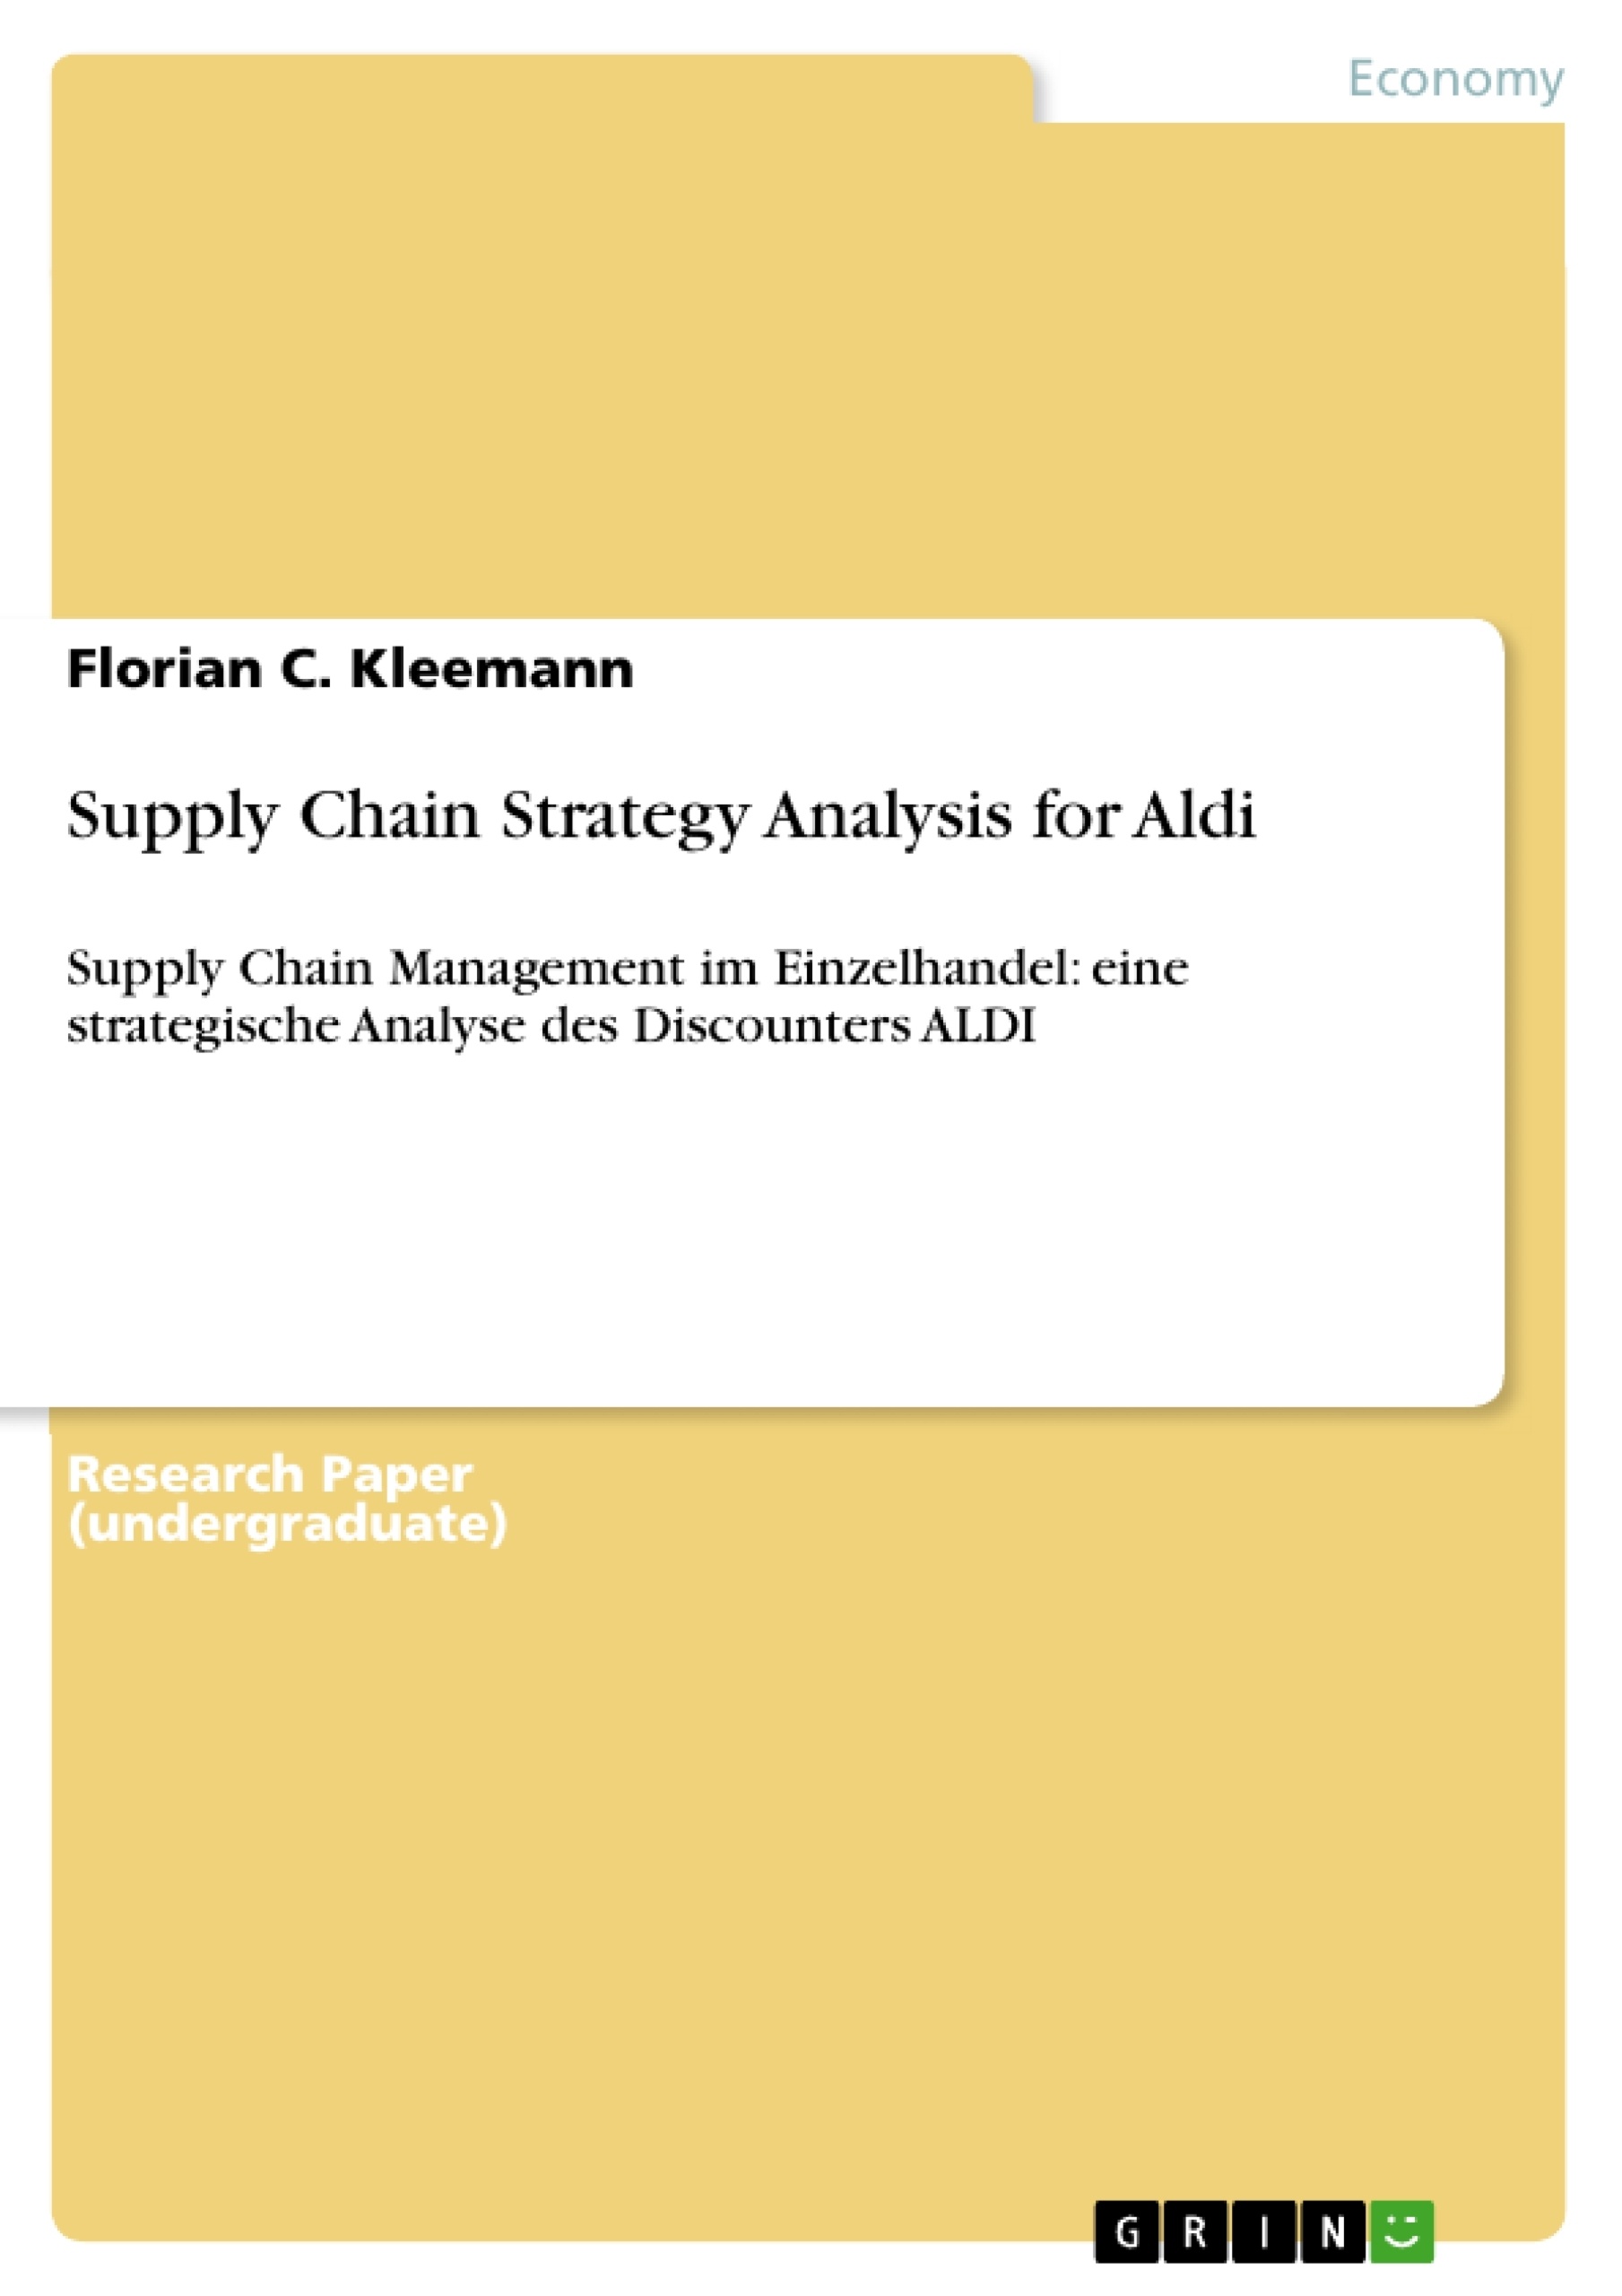 Buy research papers online cheap strategic analysis of aldi